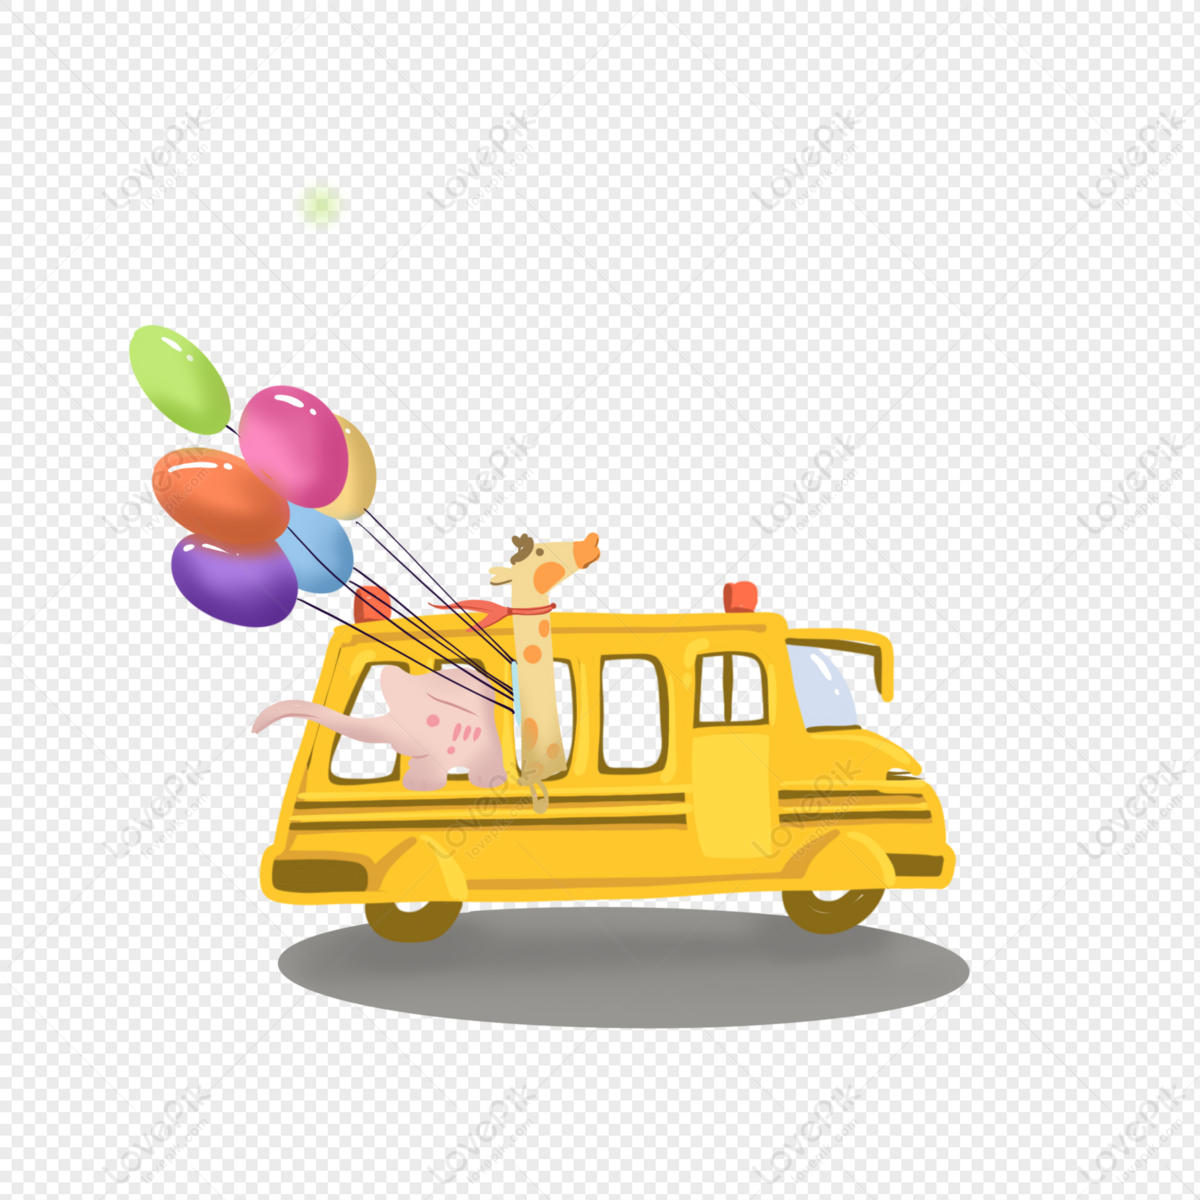 Animal Bus PNG Transparent Background And Clipart Image For Free Download -  Lovepik | 401276440